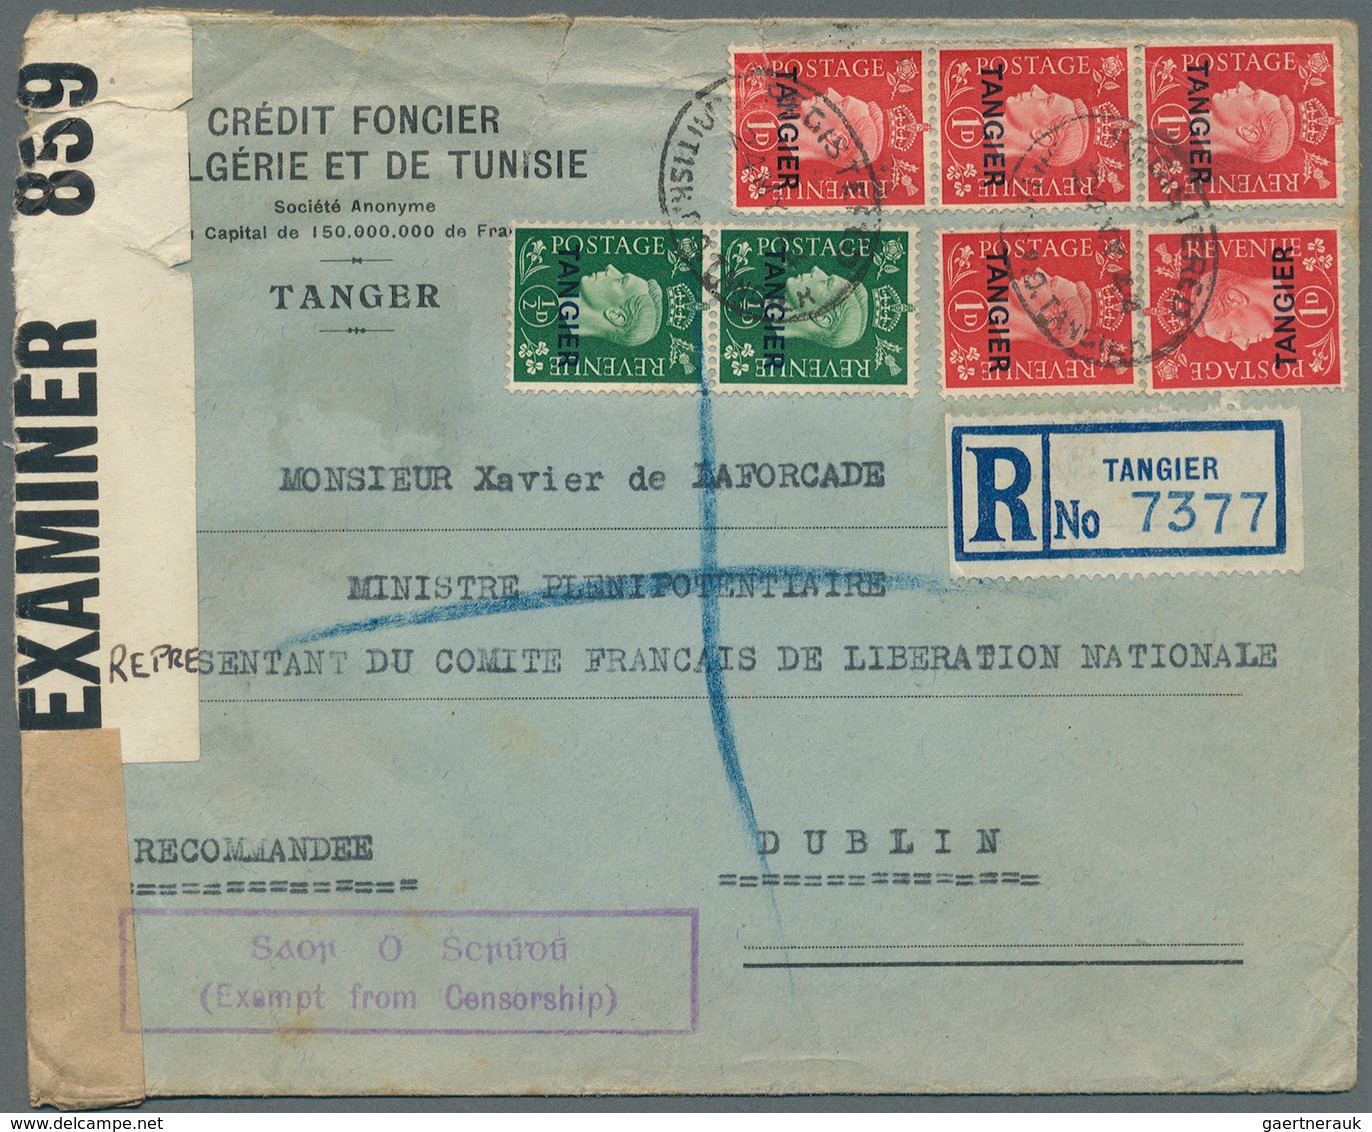 Tanger - Britische Post: 1944. Registered Envelope (minor Faults) Addressed To The 'Free French Nati - Morocco Agencies / Tangier (...-1958)